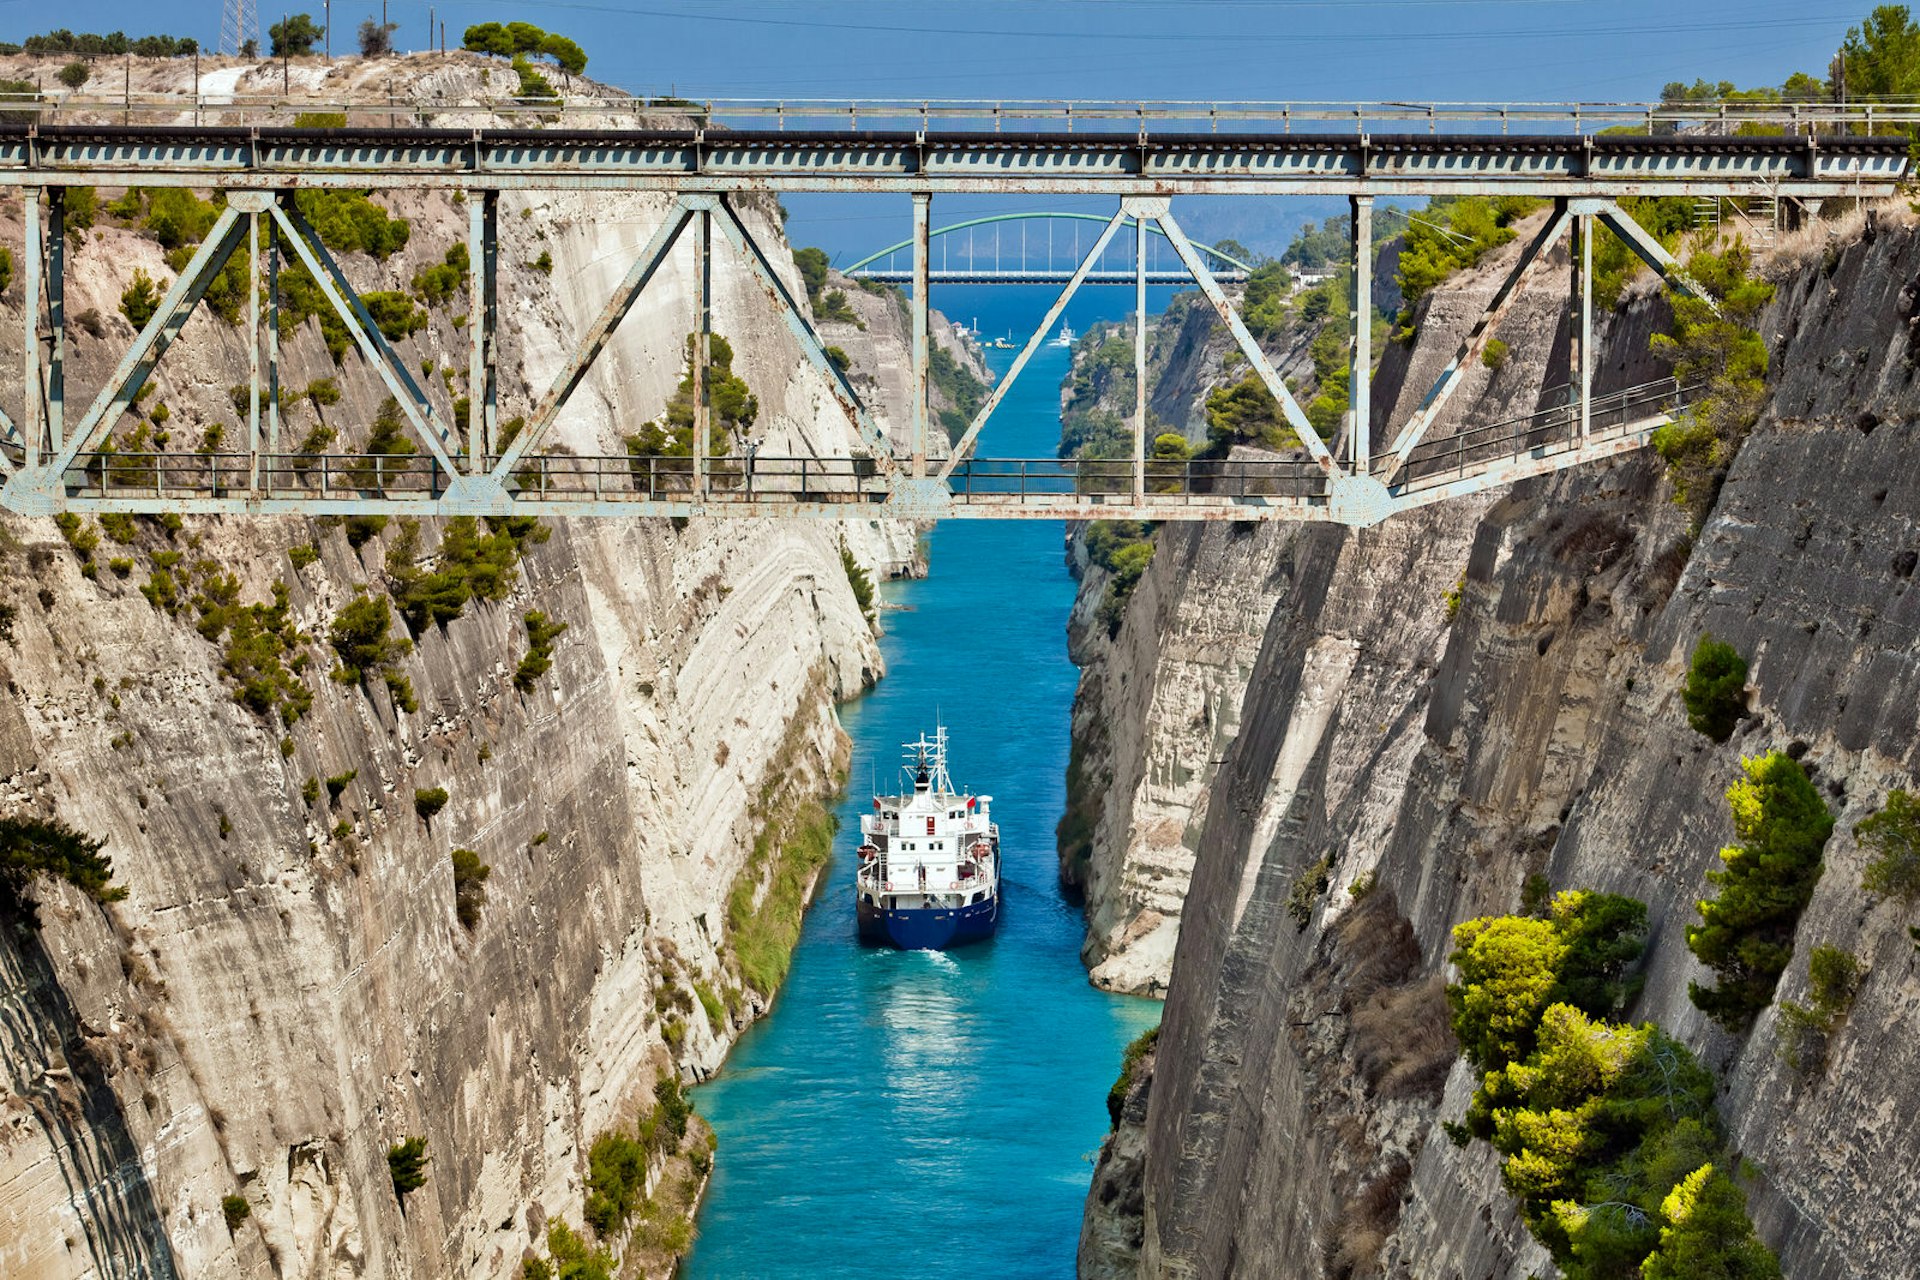 A boat crossing the Corinth Canal © Alexander Tolstykh / Shutterstock